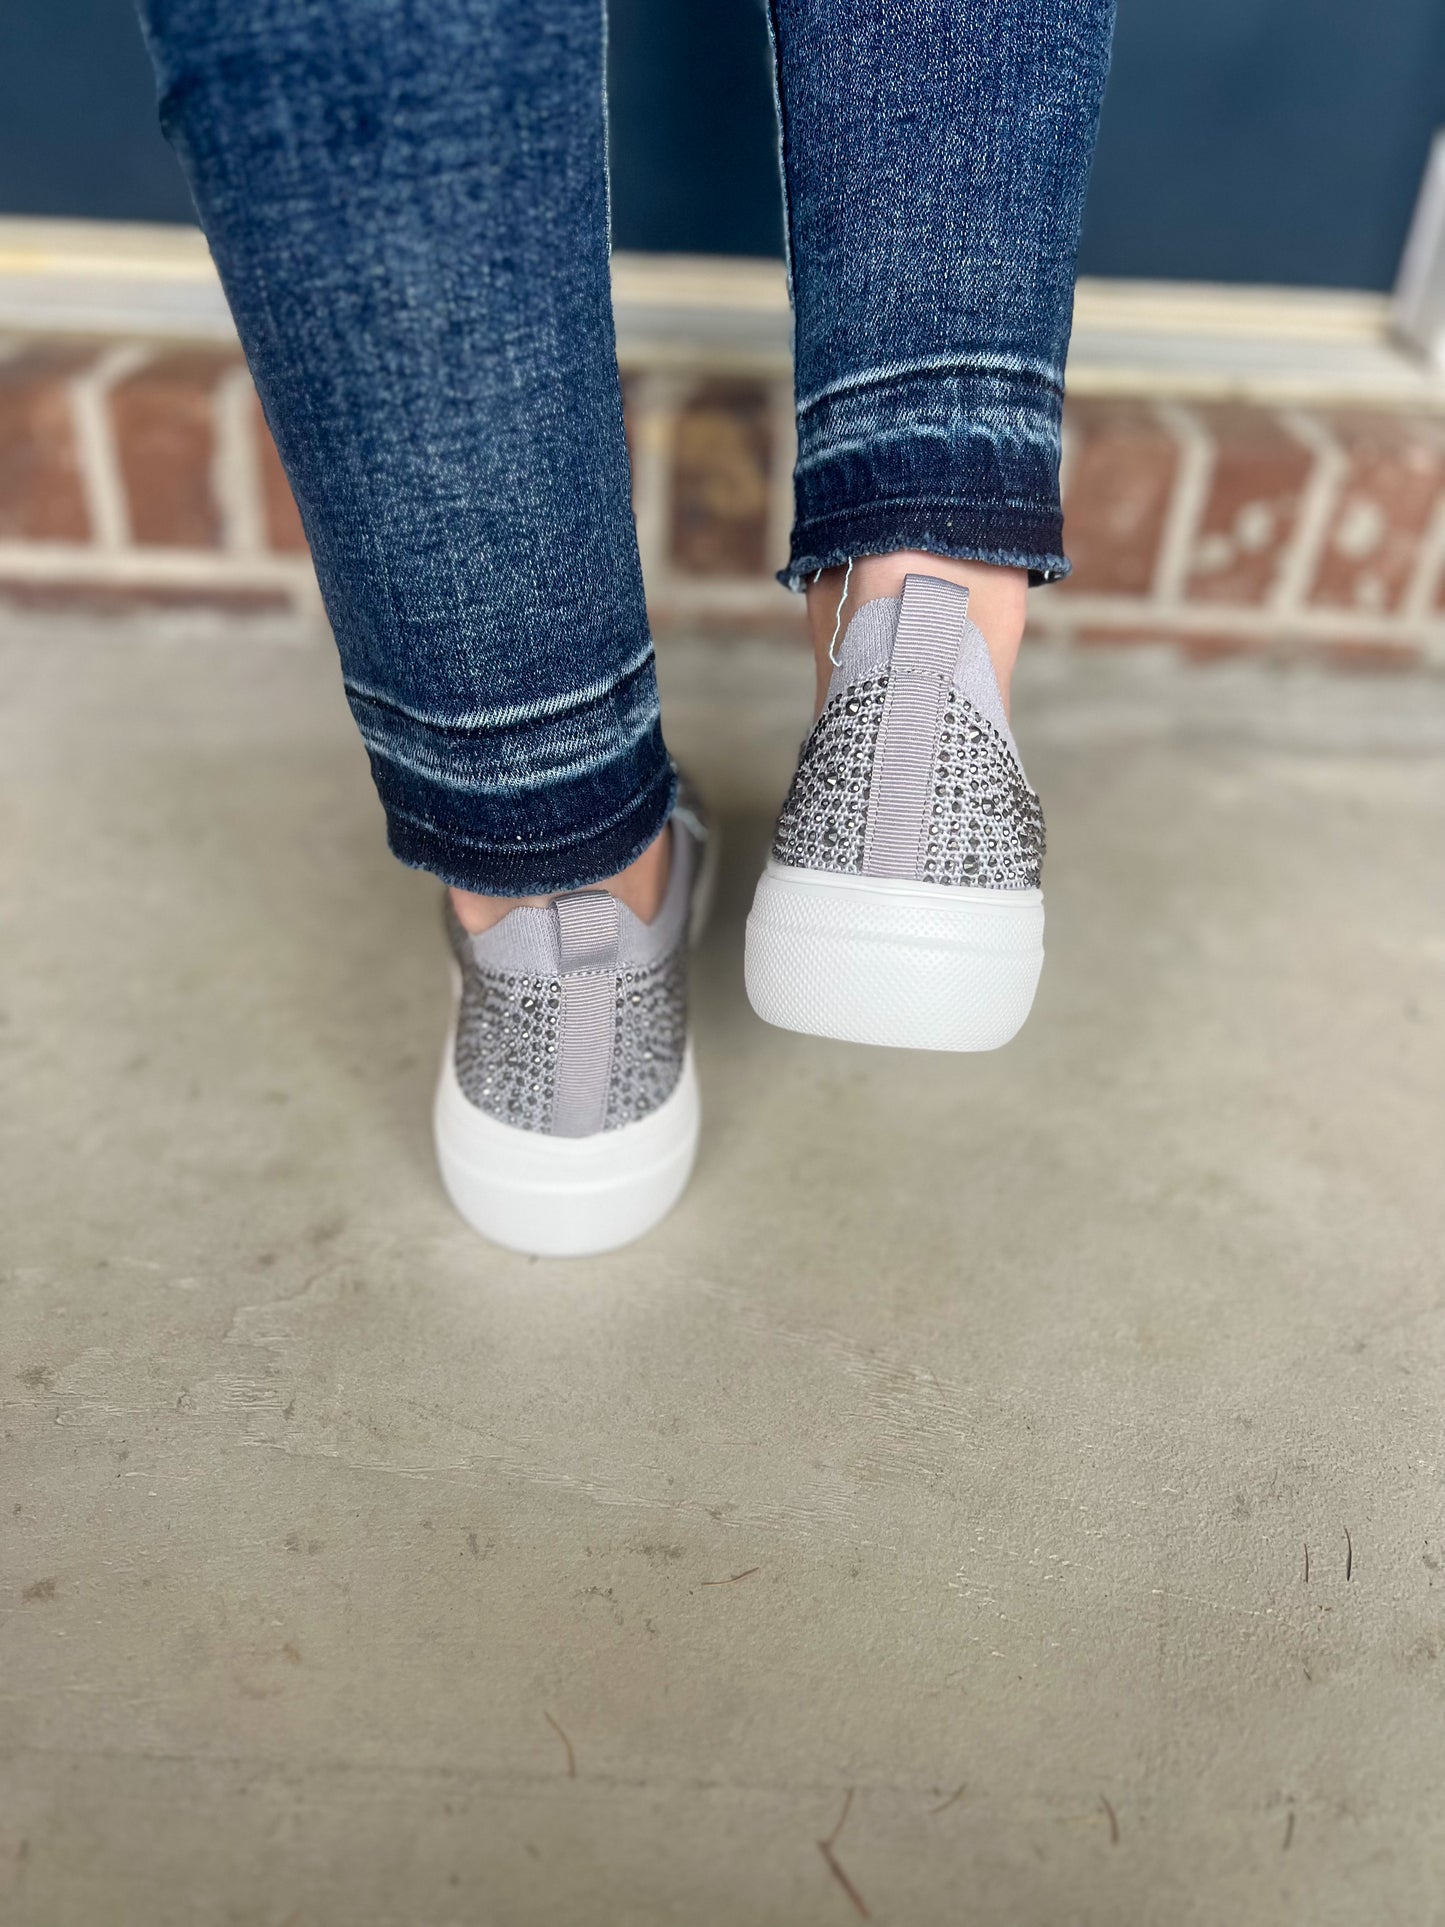 New! Corkys Swank Slip-on Sneakers - Gray Crystals